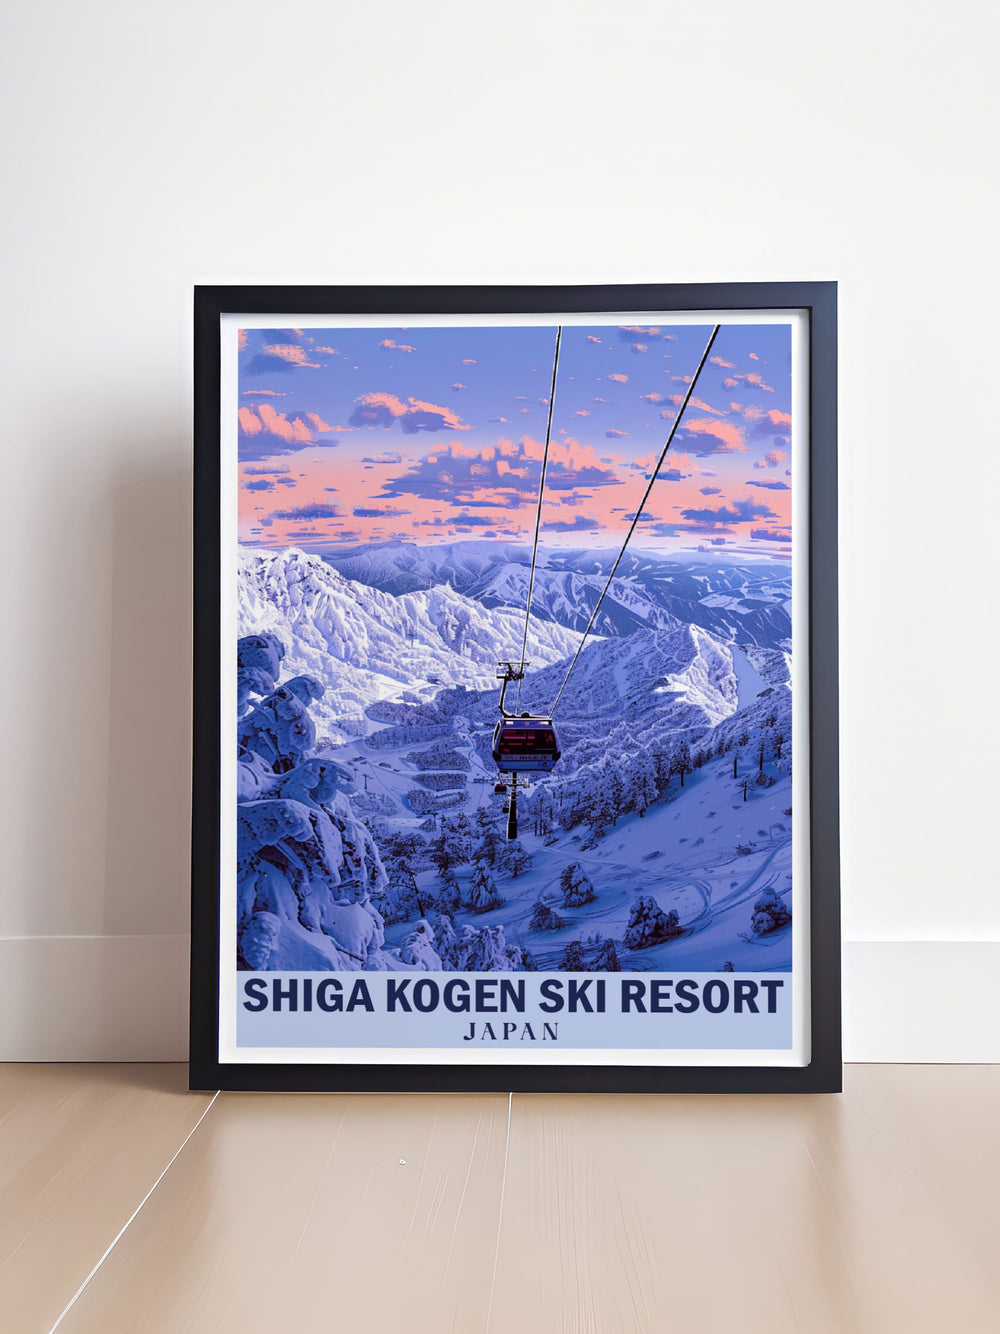 Bring the beauty of the Japanese Alps into your home with this detailed poster featuring Shiga Kogen, highlighting the pristine slopes and vibrant winter sports culture of Nagano, Japan.